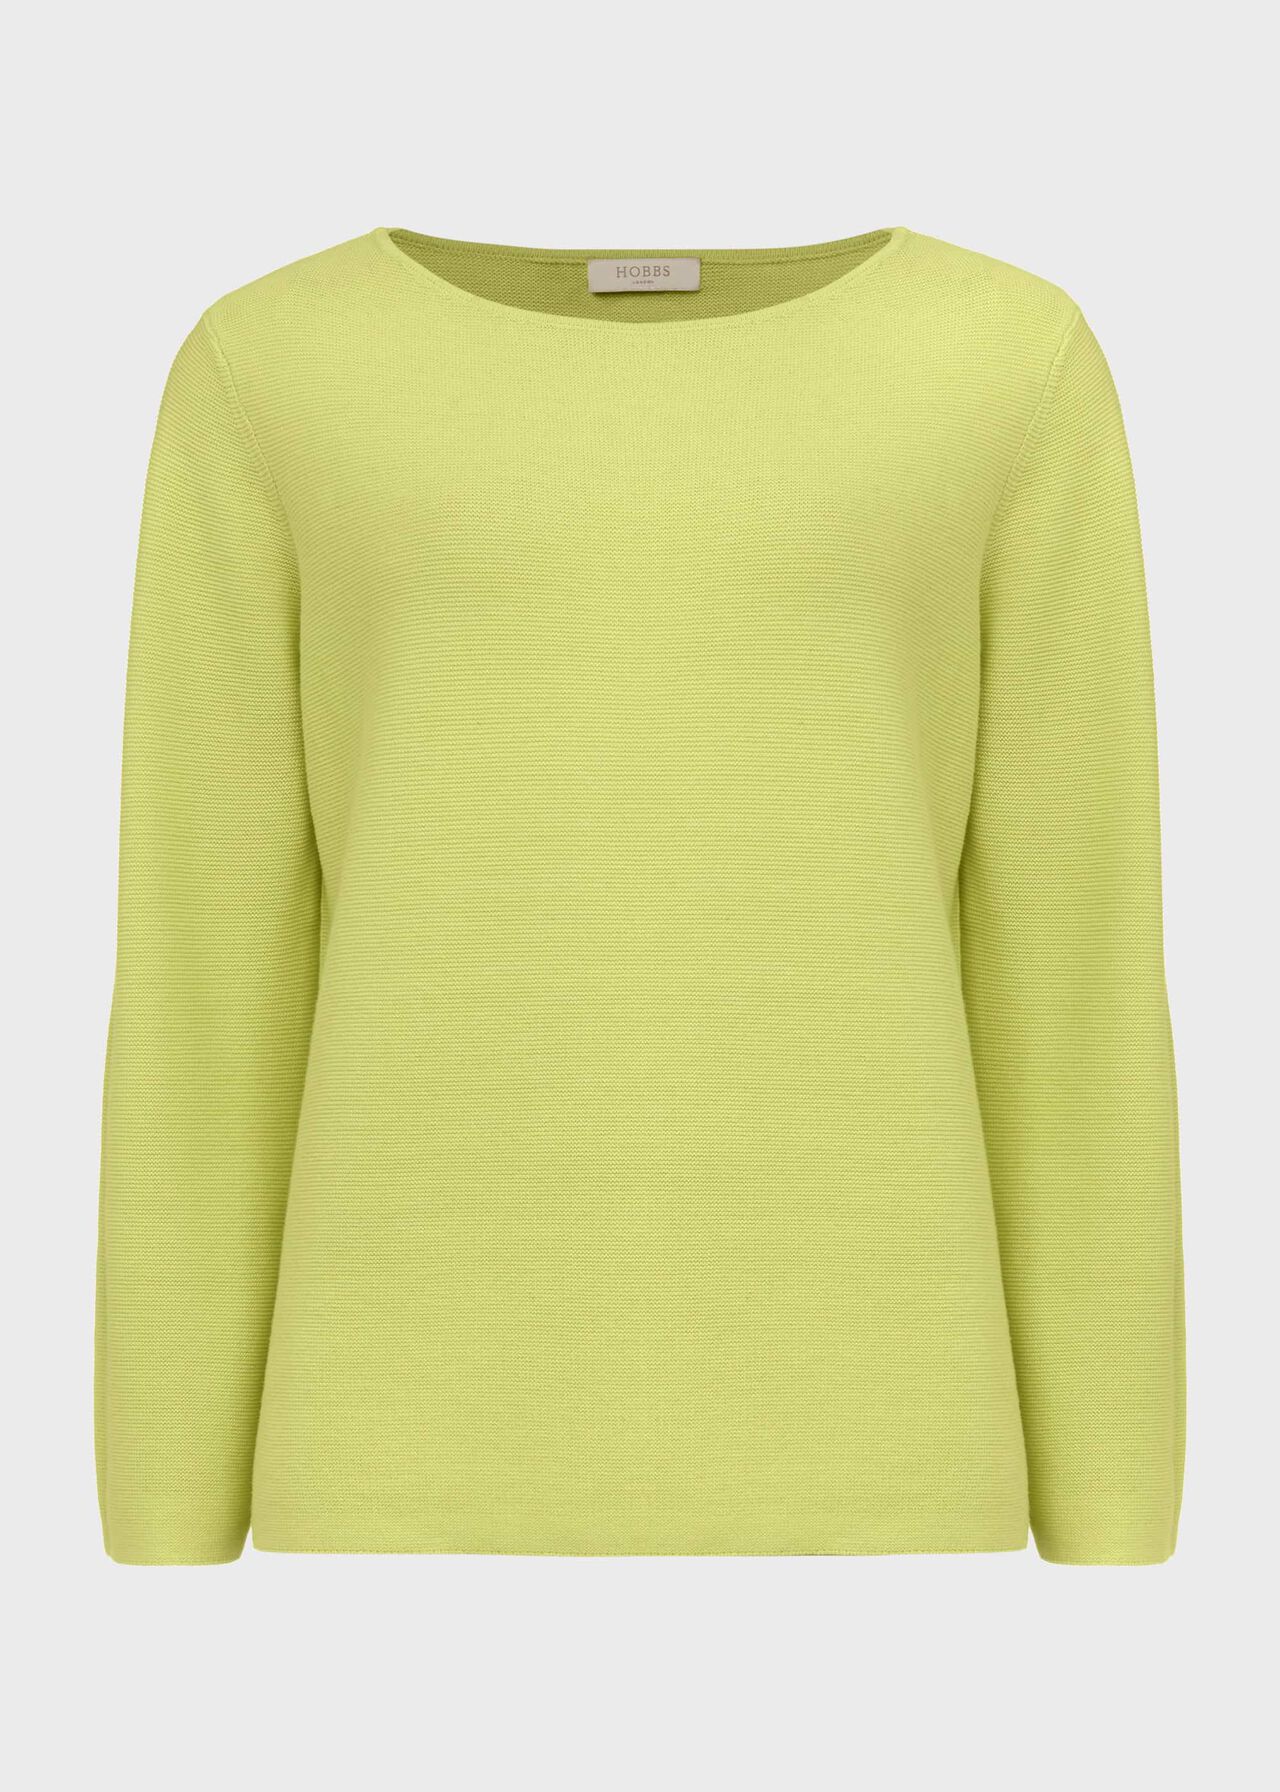 Beatrice Cotton Sweater, Lime Green, hi-res